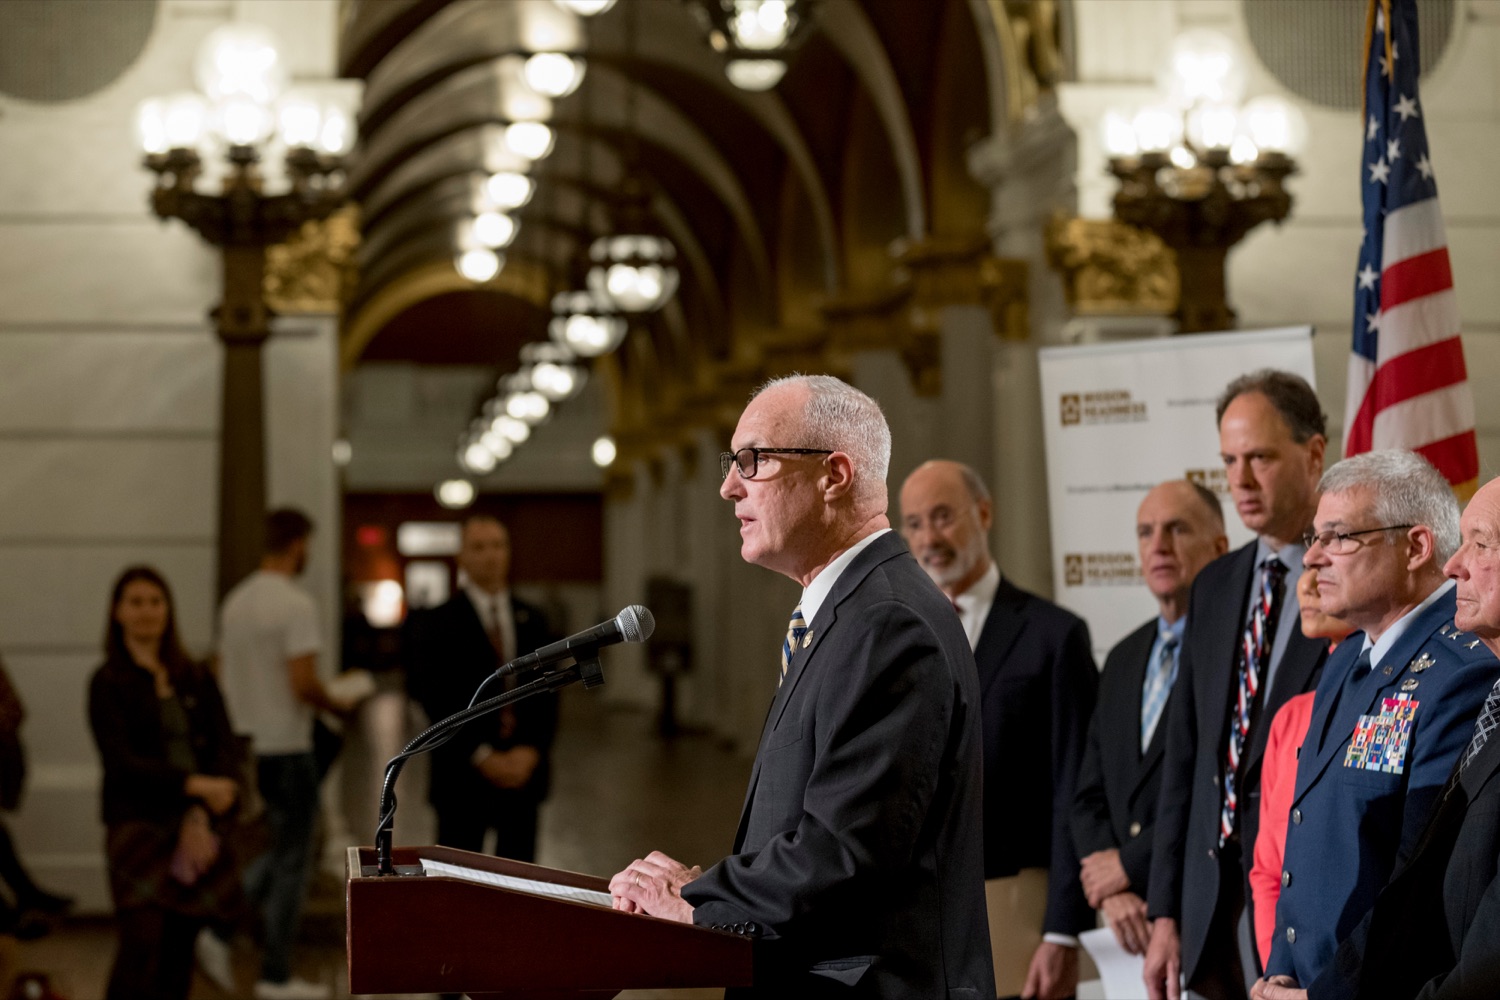 State Rep. Tom Murt speaks during a press conference outlining how competition for qualified individuals among all employment sectors affects military recruiting efforts and warrants greater investment in our next generation inside the Capitol Rotunda on Tuesday, November 12, 2019.<br><a href="https://filesource.amperwave.net/commonwealthofpa/photo/17588_GOV_Mission_Readiness_NK_014.JPG" target="_blank">⇣ Download Photo</a>